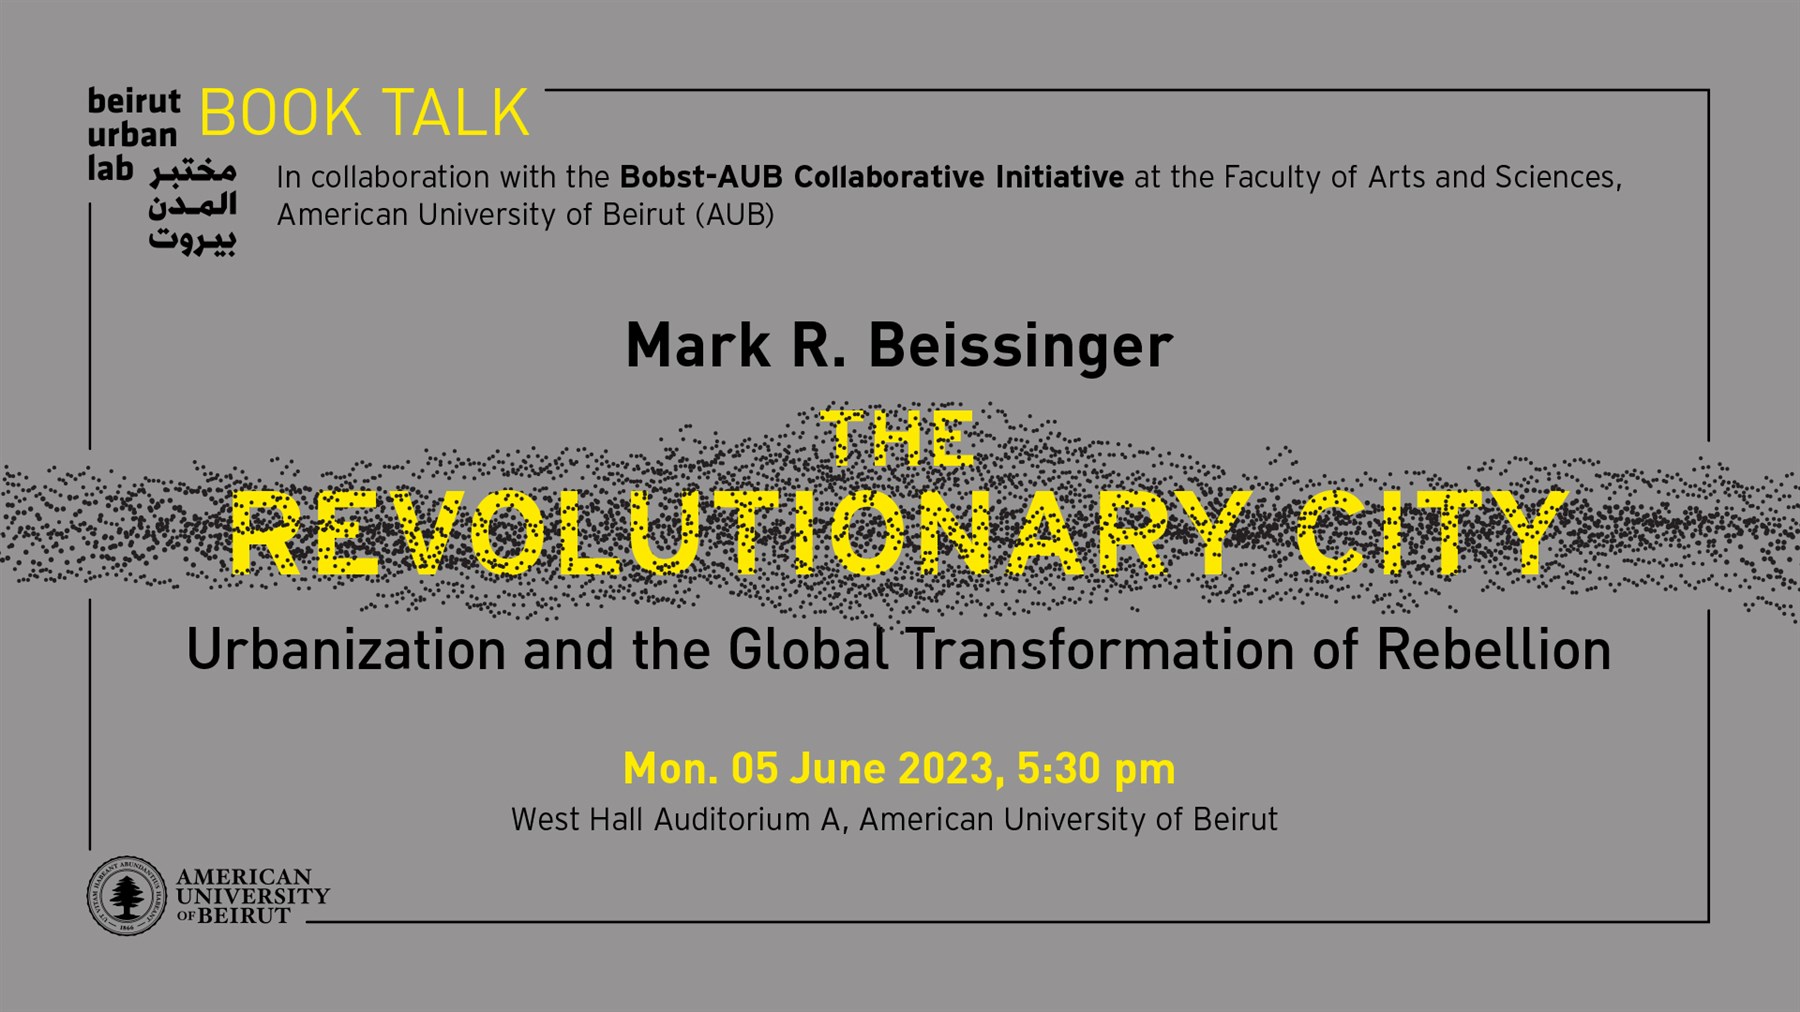 The Revolutionary City: Urbanization and the Global Transformation of Rebellion